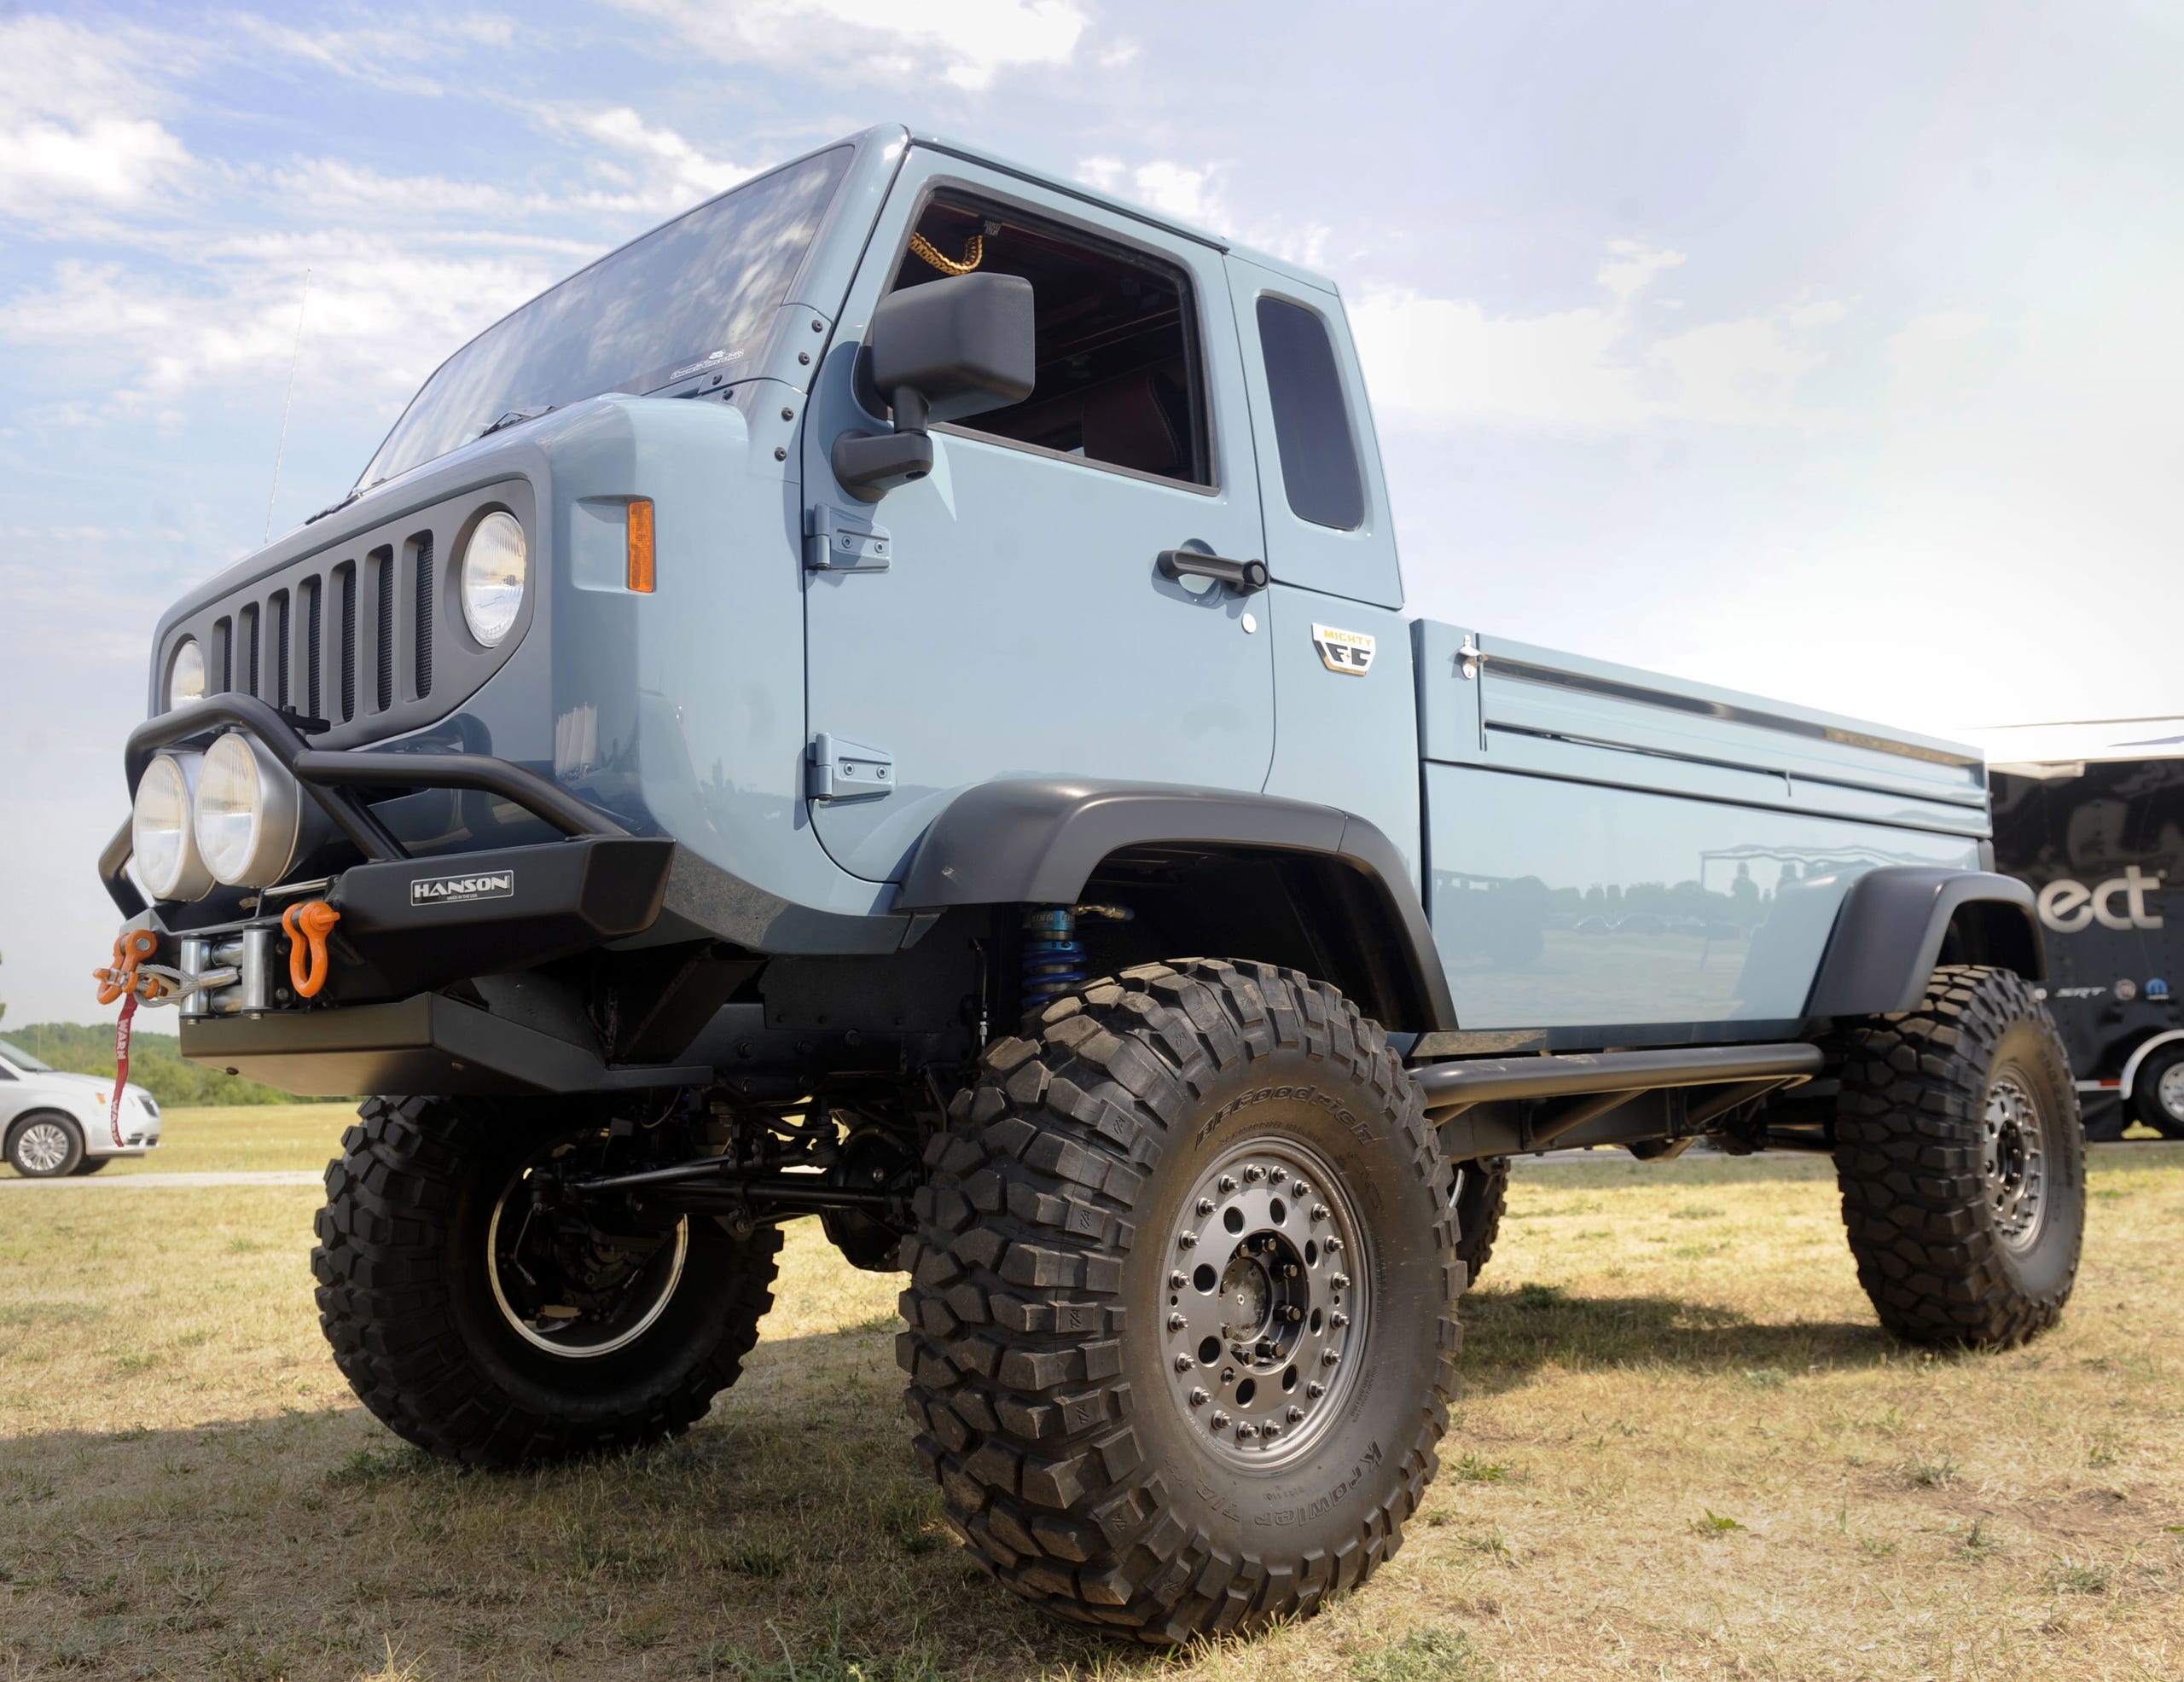 A 2013 concept, the Jeep Mighty FC.